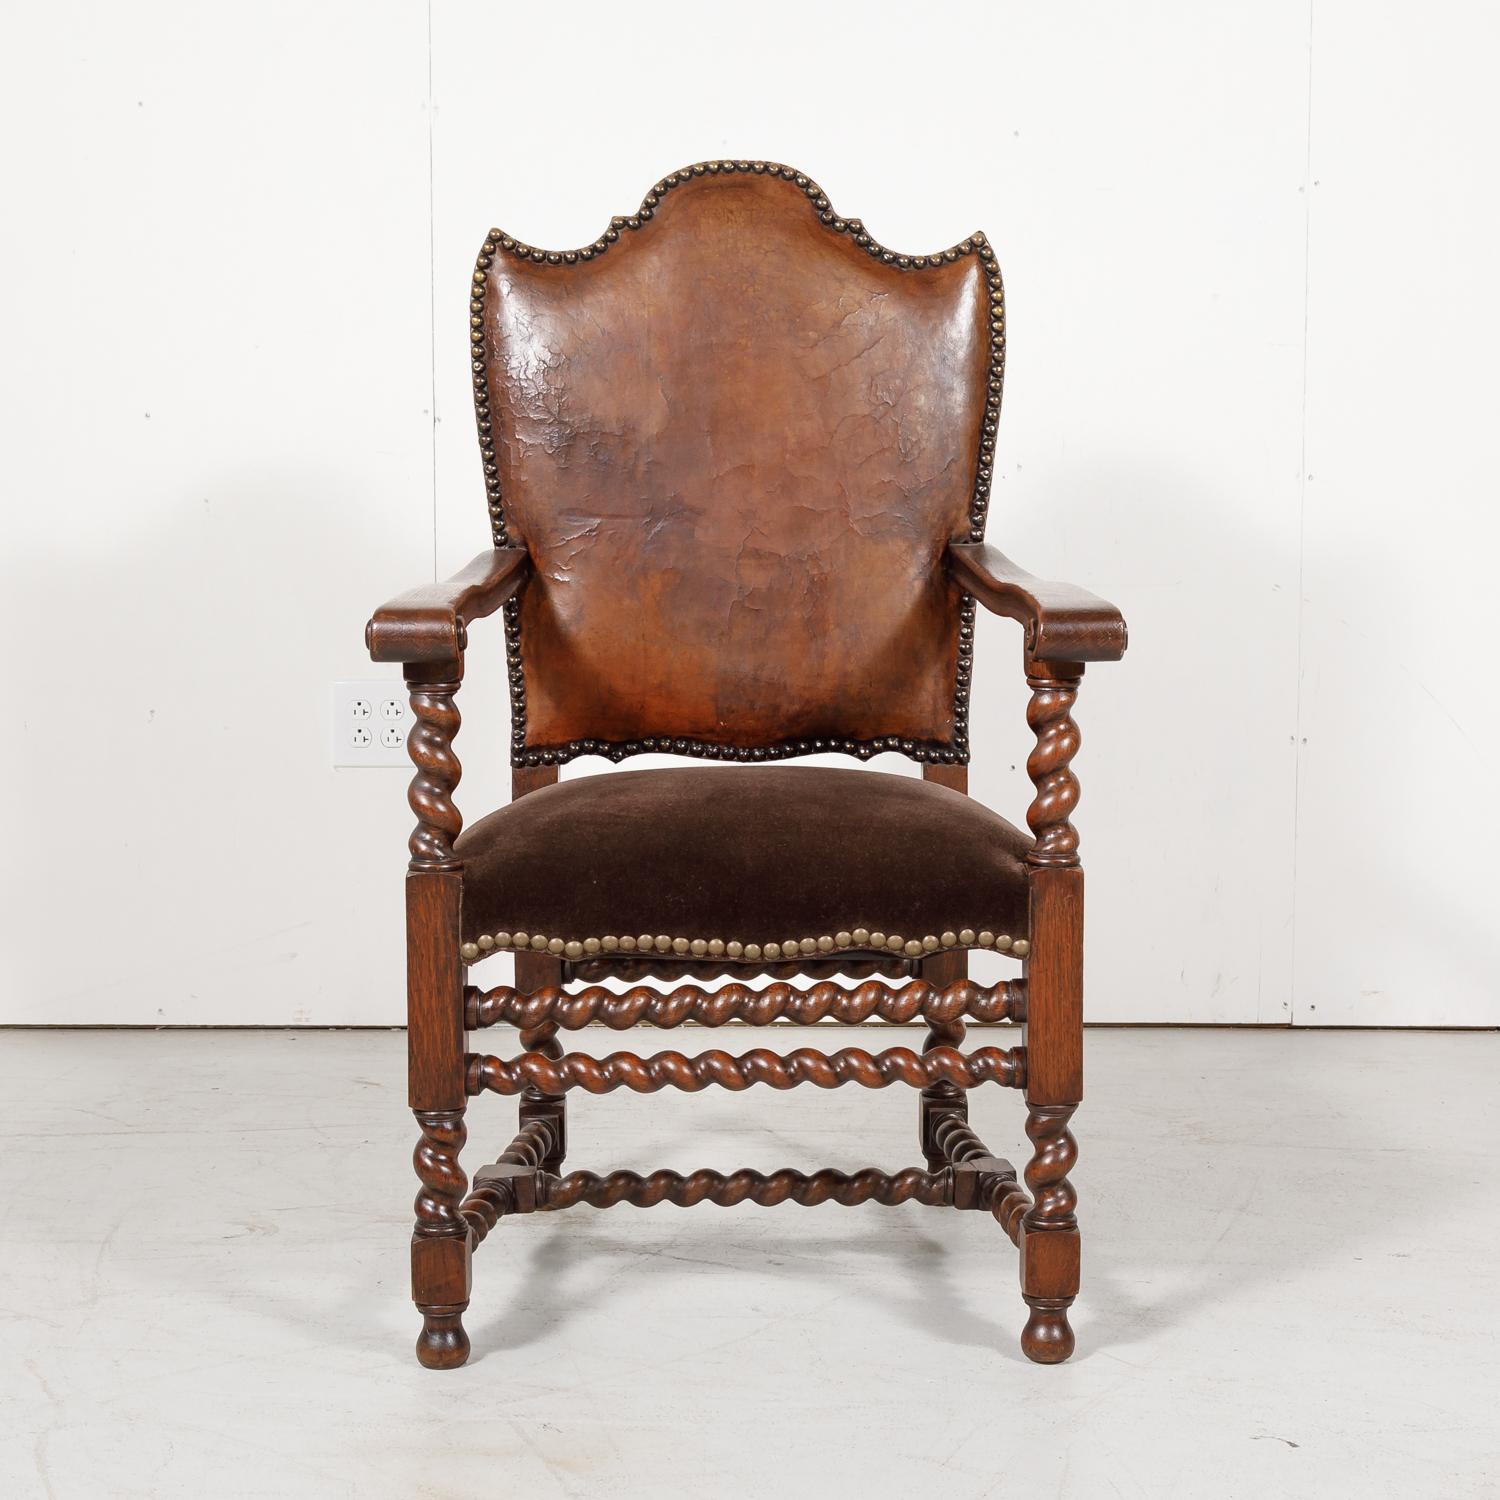 Antique French Louis XIII style barley twist armchair handcrafted and carved of old growth French oak by talented artisans in Bordeaux, having the original leather back and newly upholstered mohair seat with nailhead trim, circa 1860s. The stylized